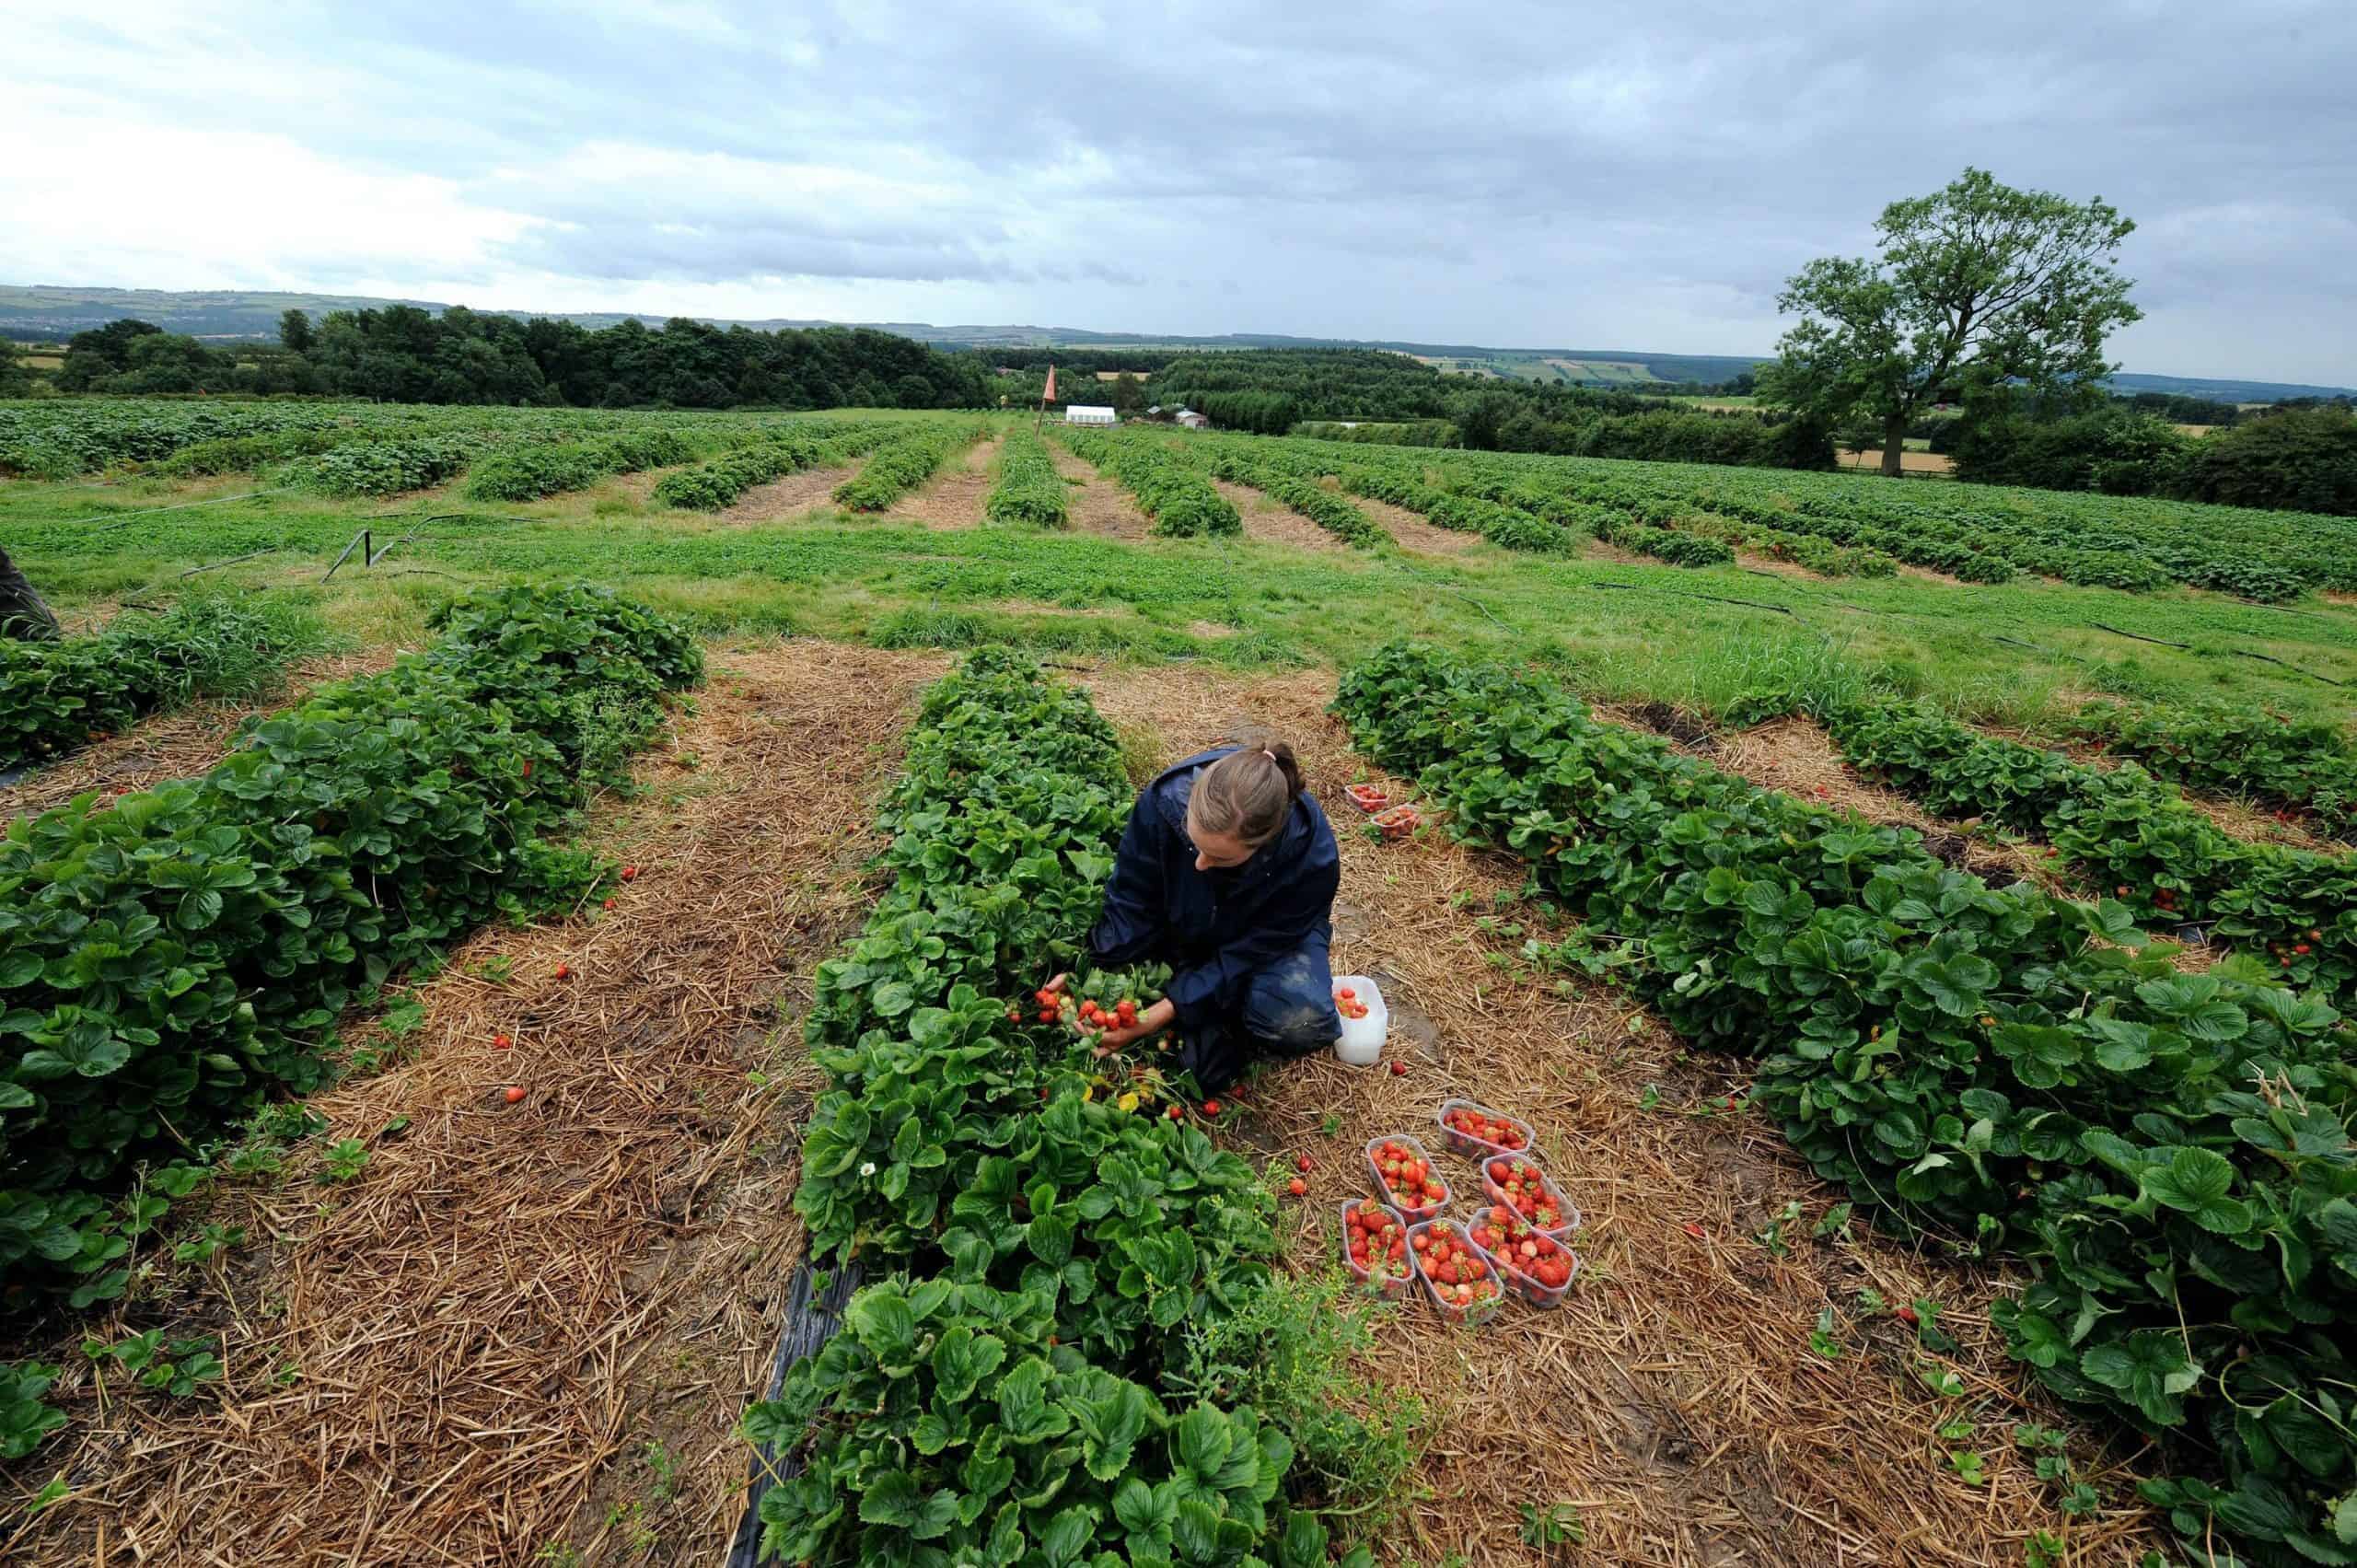 British fruit pickers 44% less productive than migrant workers